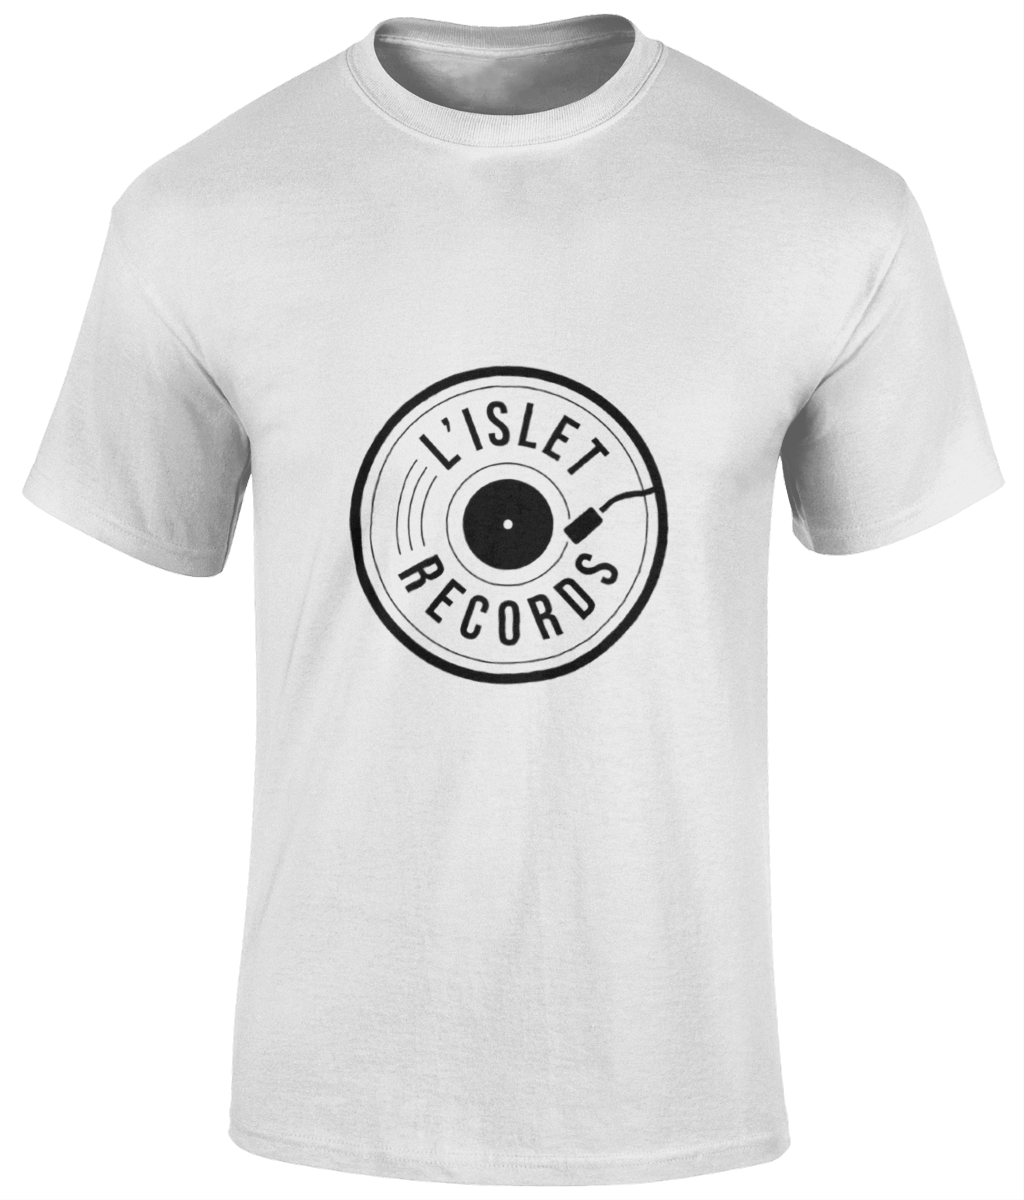 L'islet Records black logo on white cotton t shirt.  Material: 100% cotton.  Seamless twin needle collar. Taped neck and shoulders. Tubular body. Twin needle sleeves and hem. White Sizes small to 5XL